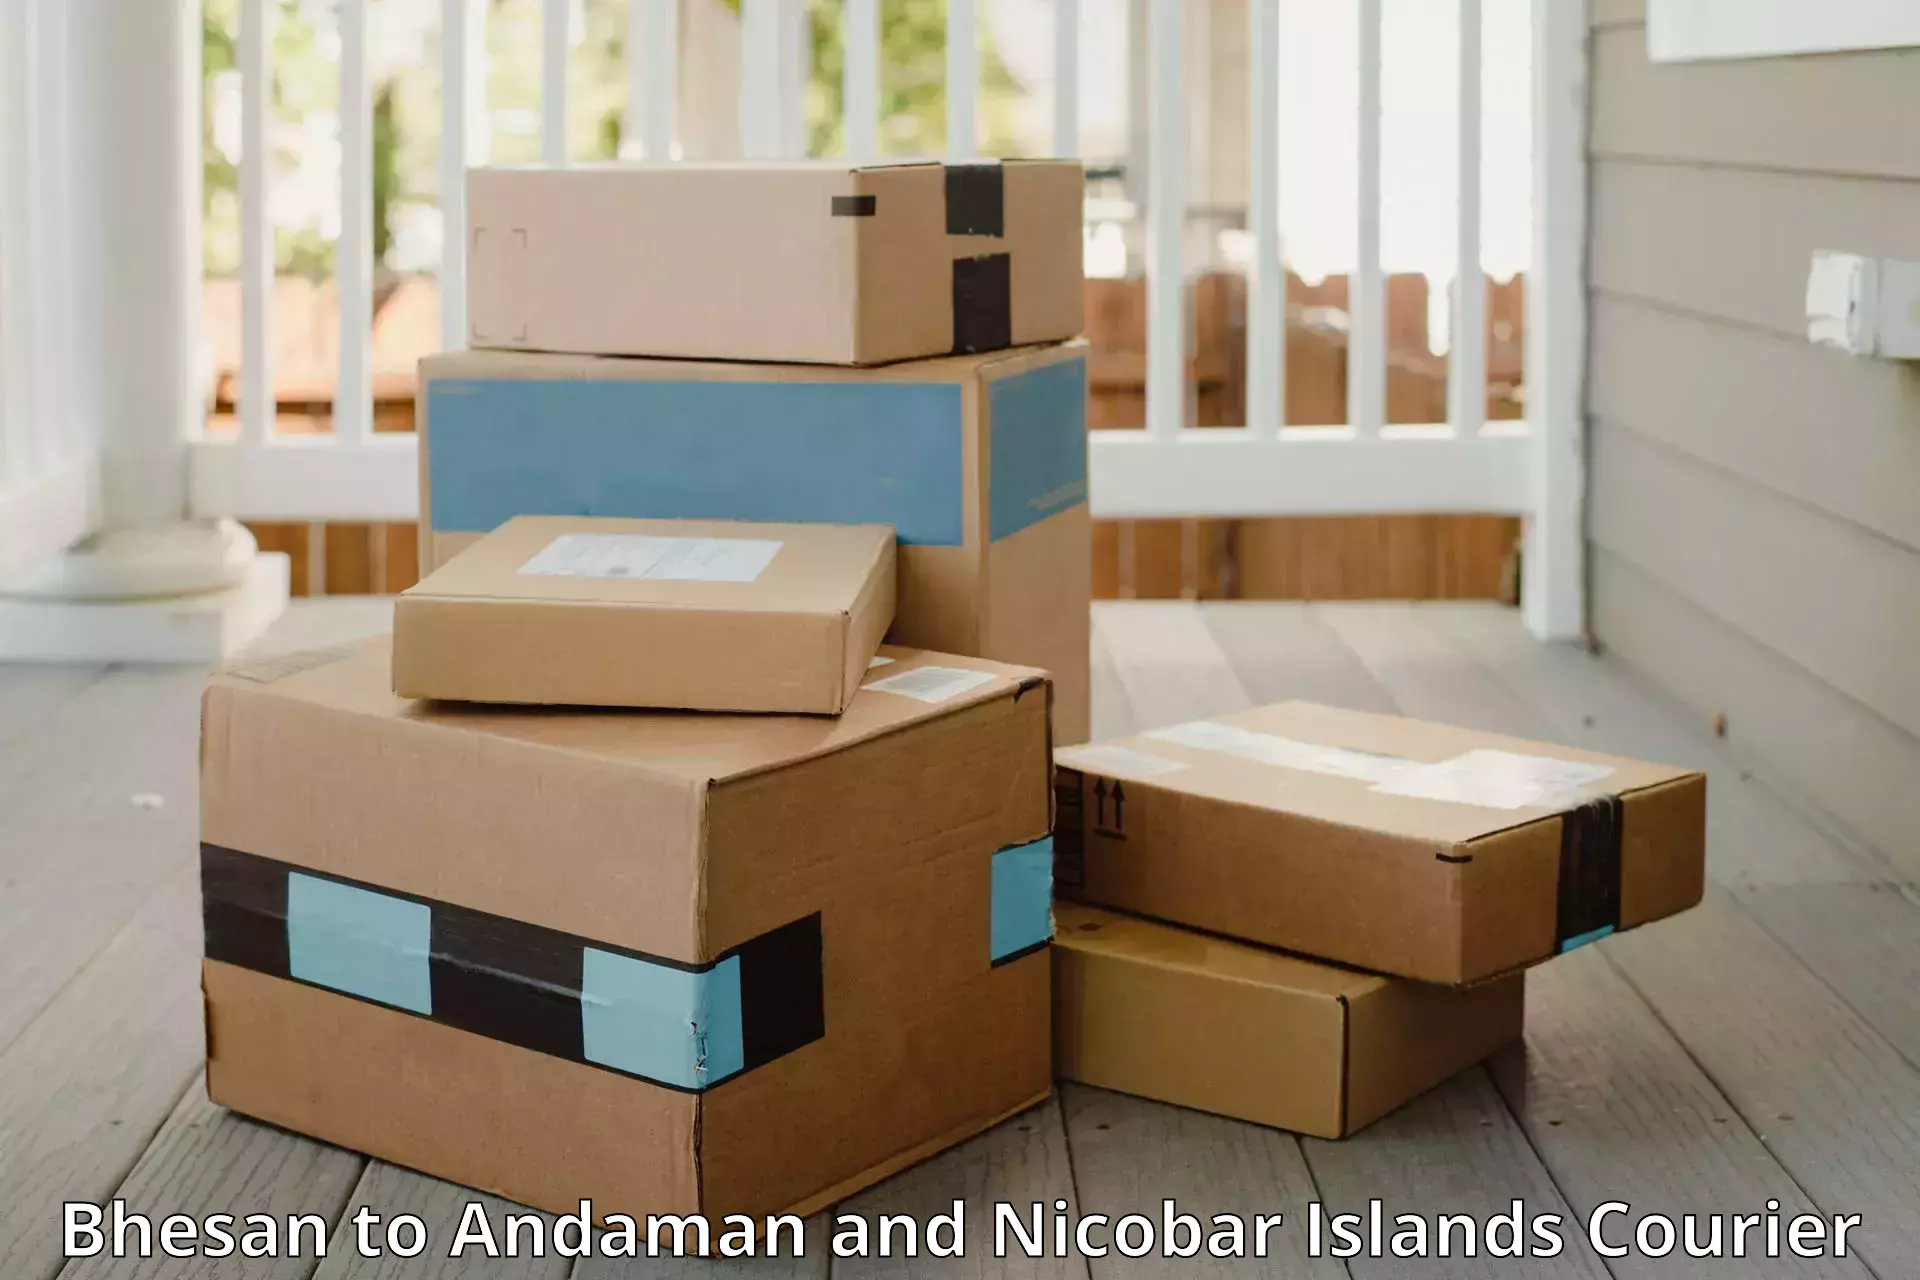 Luggage shipment specialists Bhesan to Andaman and Nicobar Islands